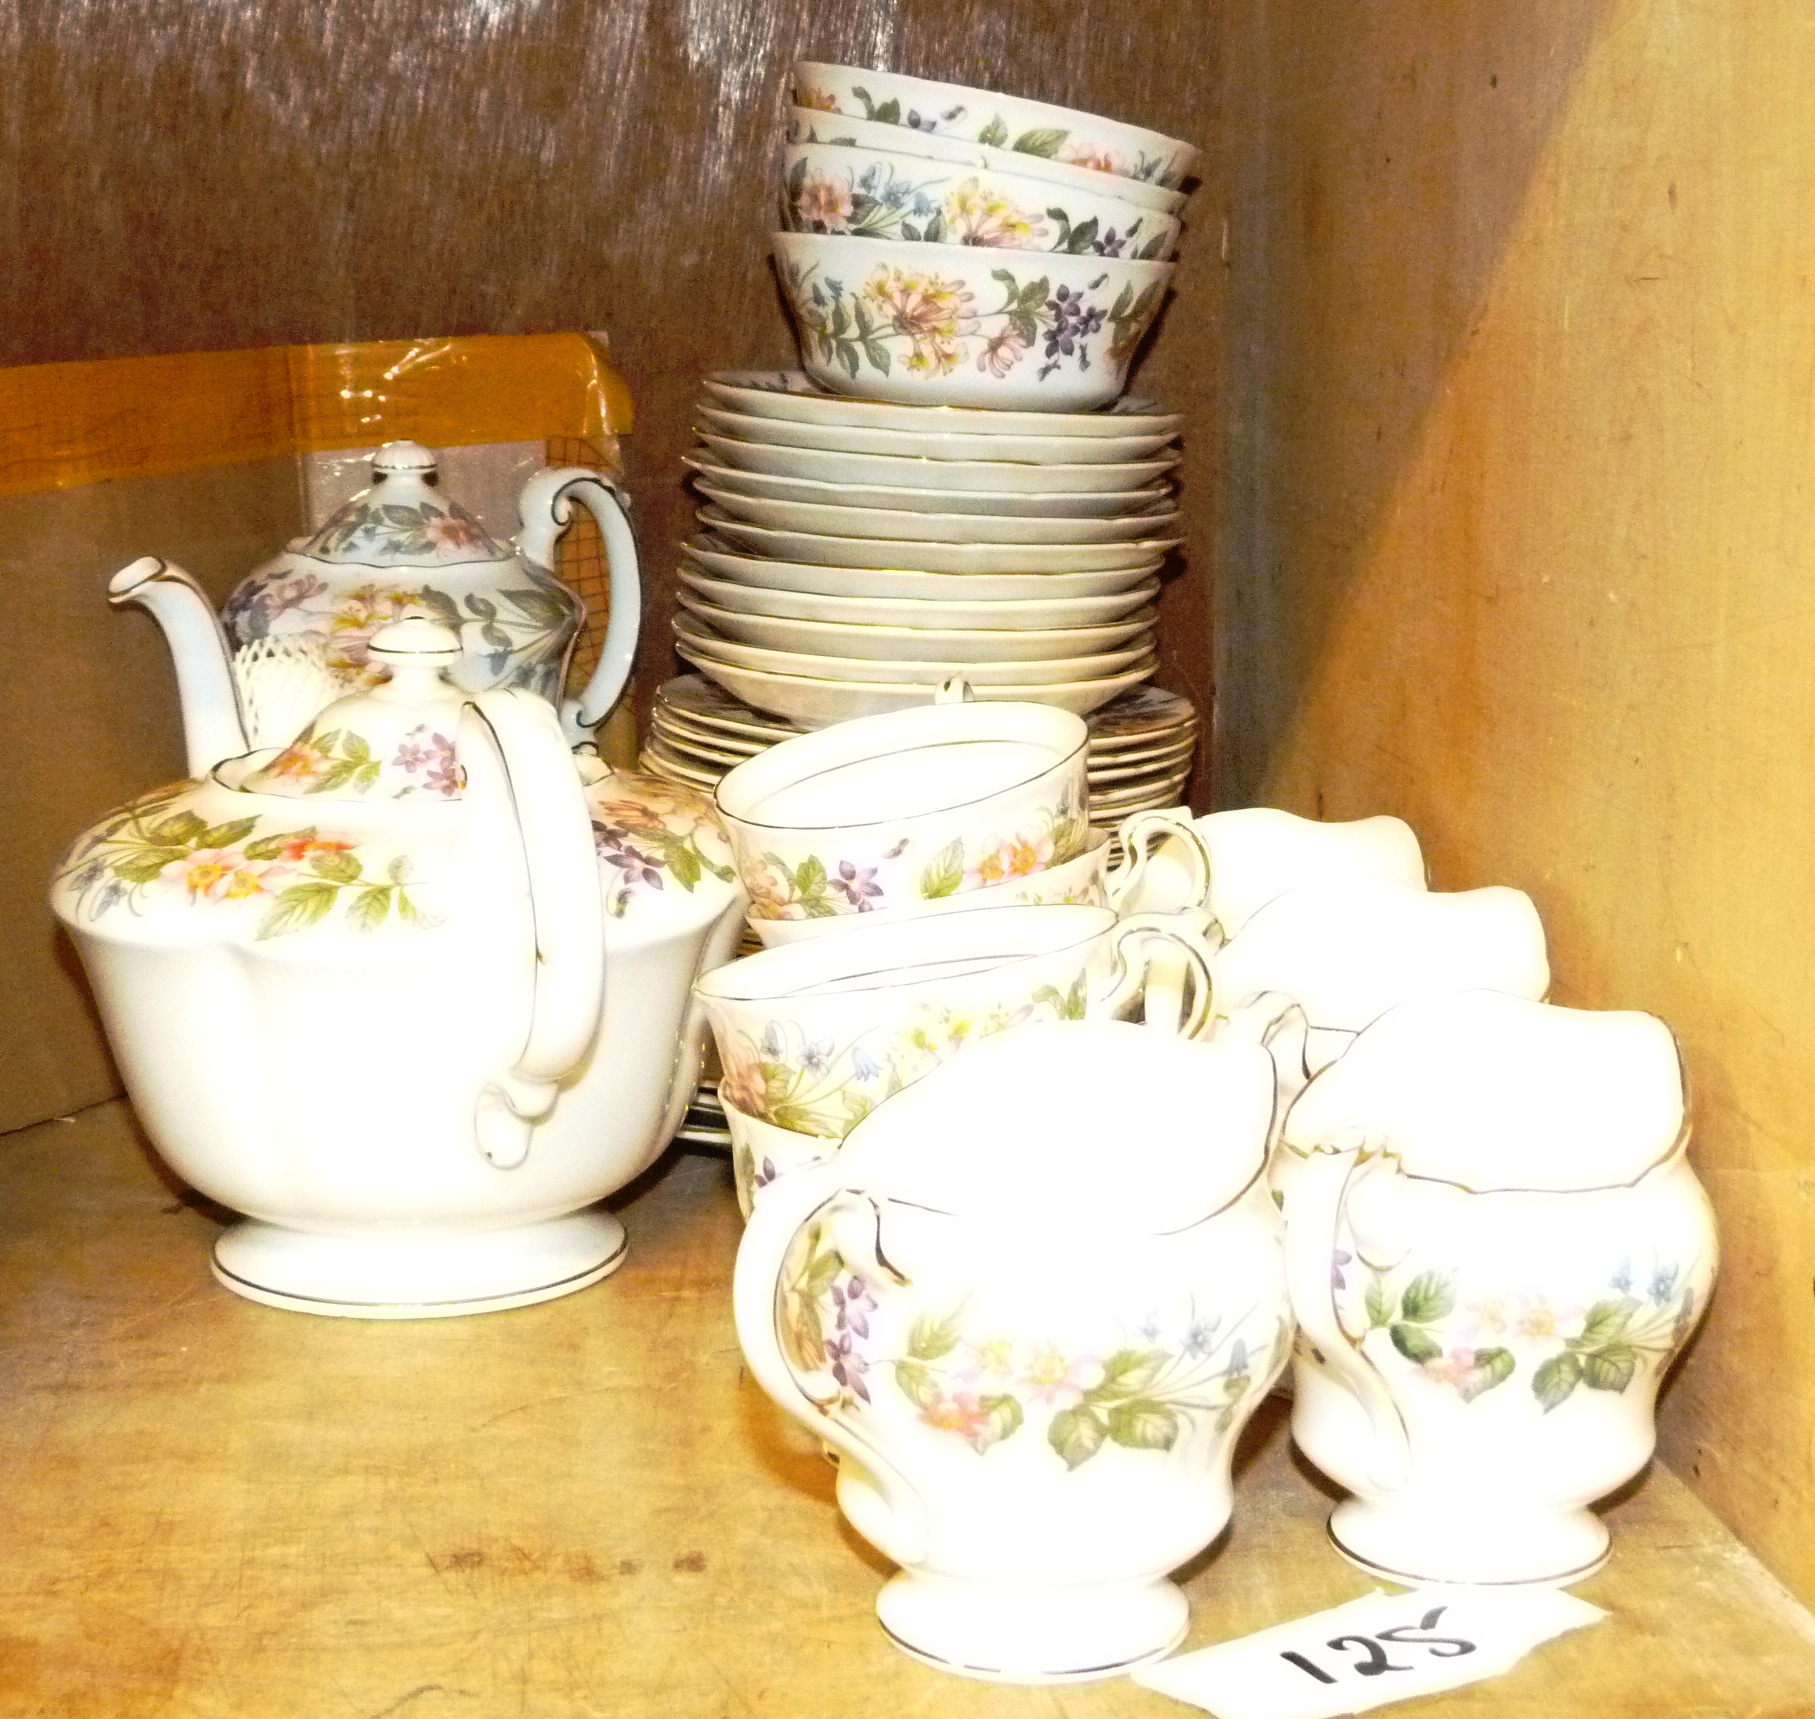 Paragon country lane tableware, approximately 48 pieces